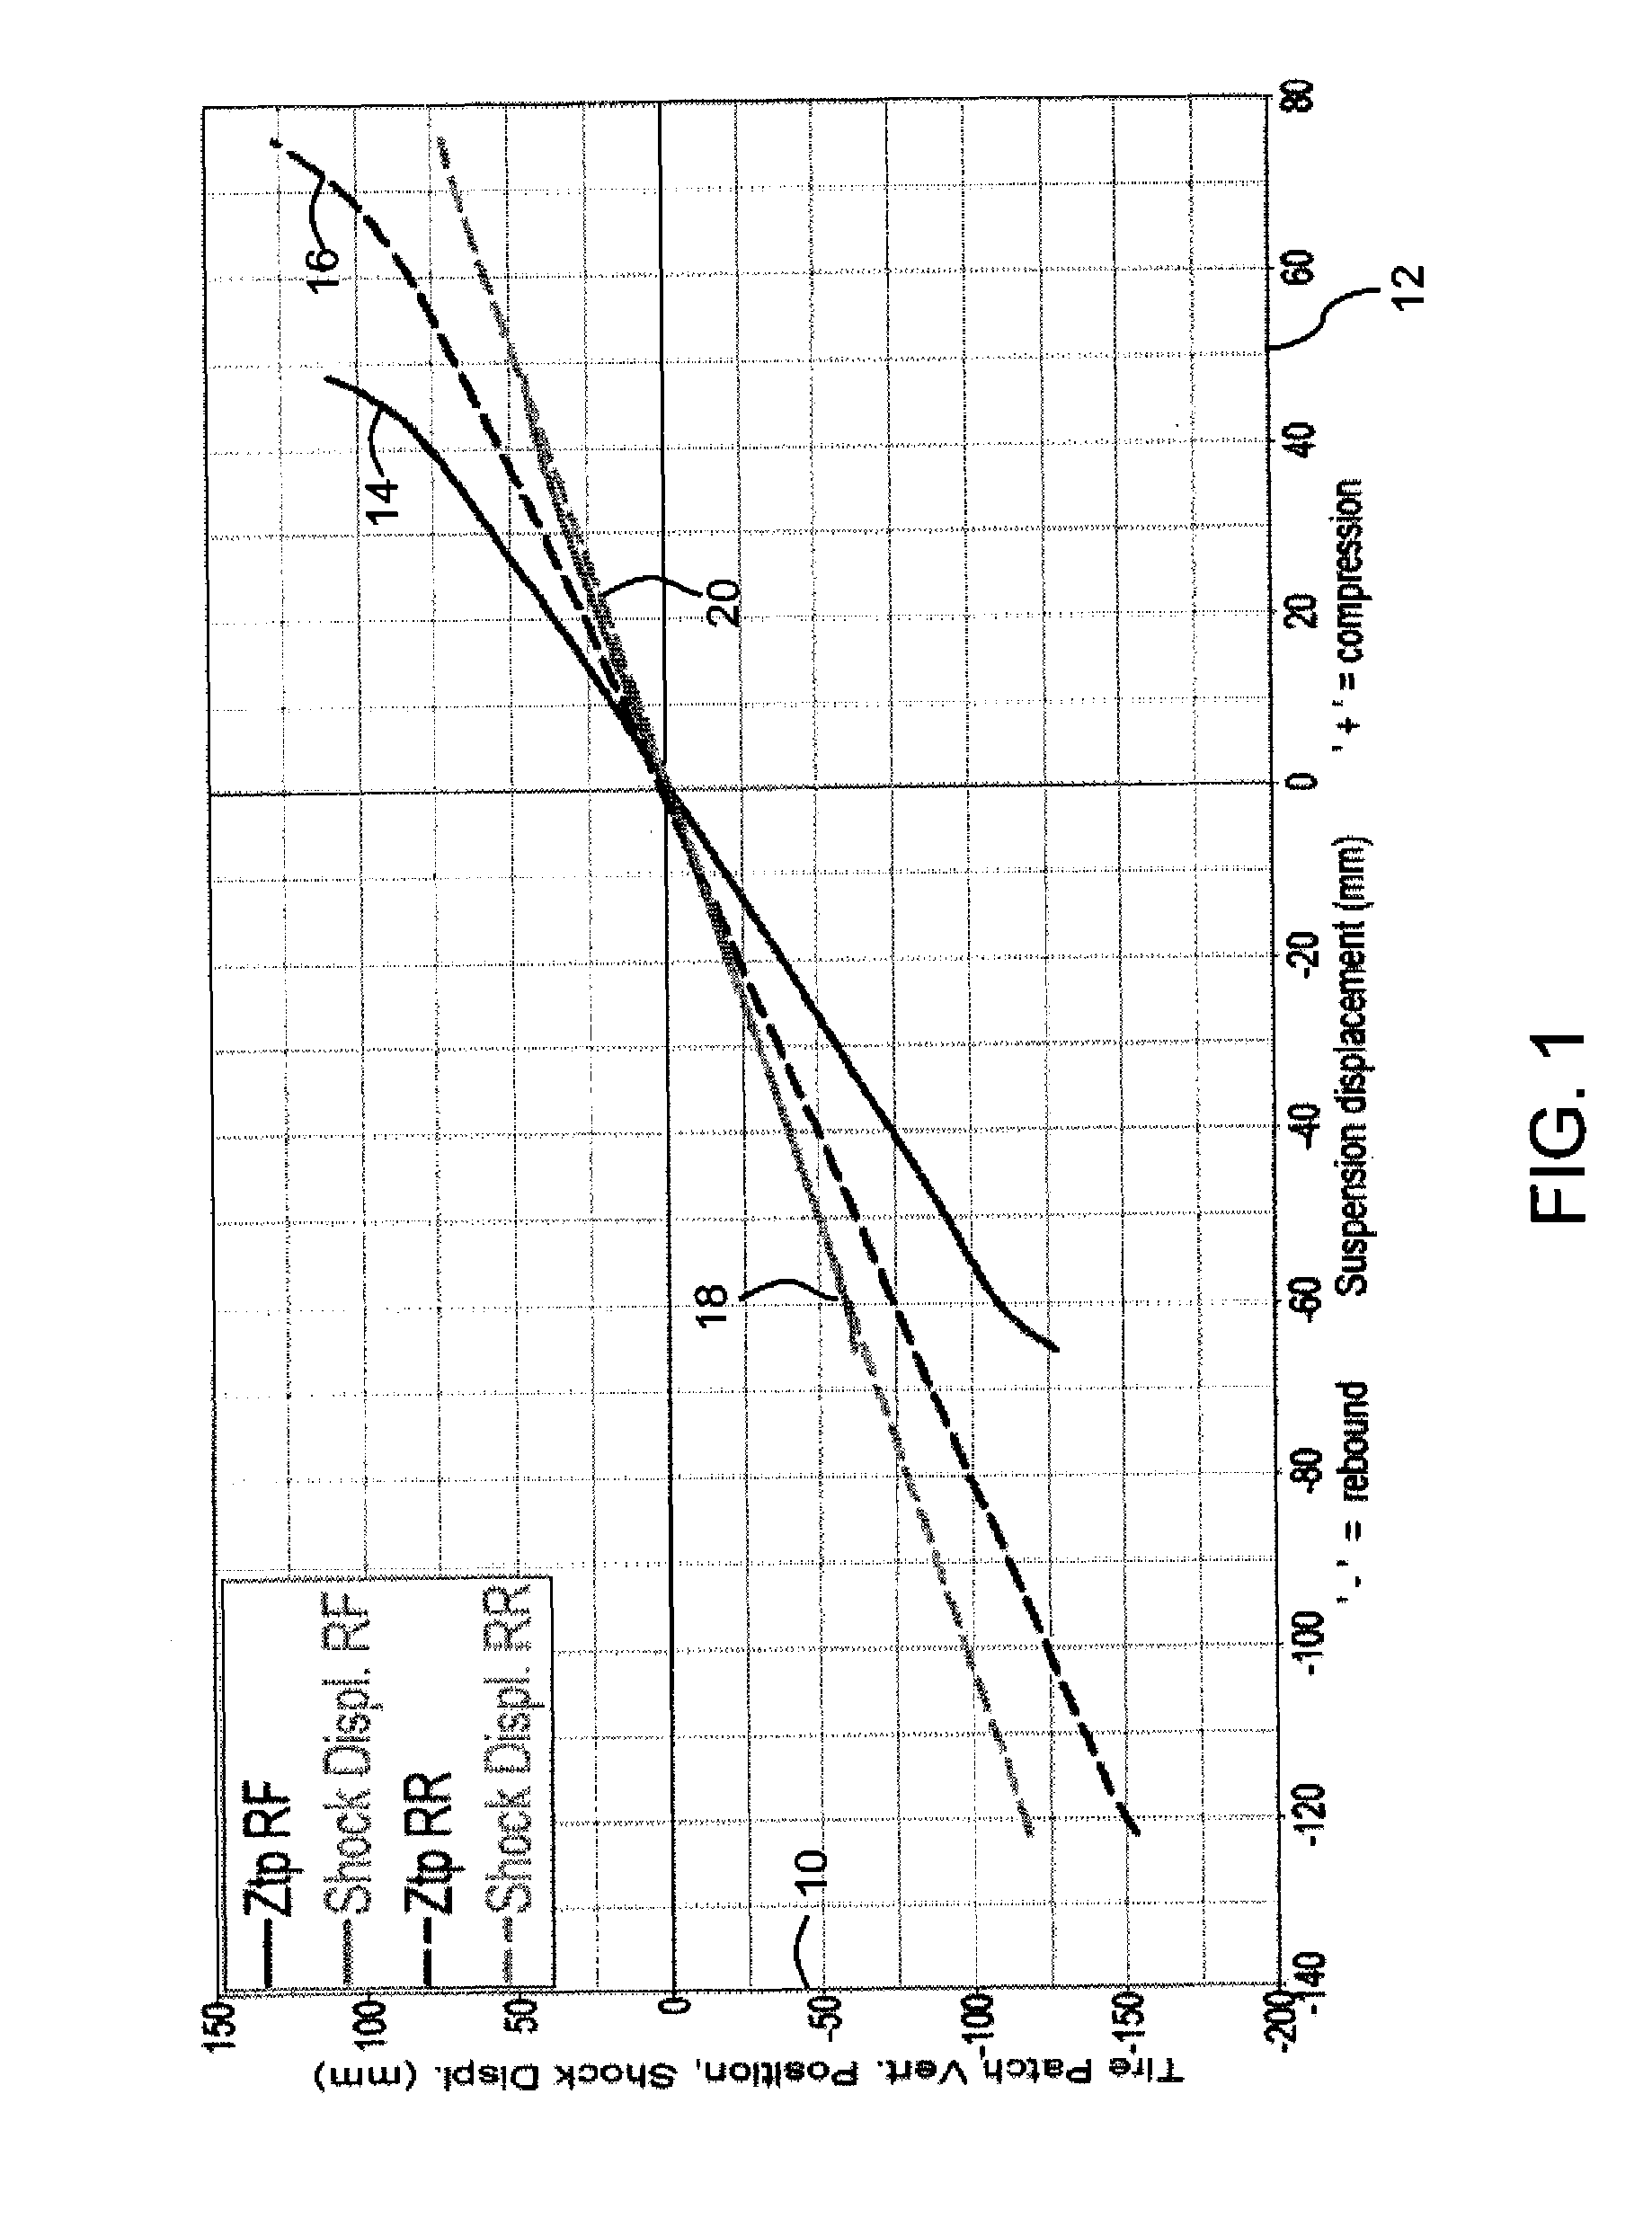 Nonlinear frequency dependent filtering for vehicle ride/stability control